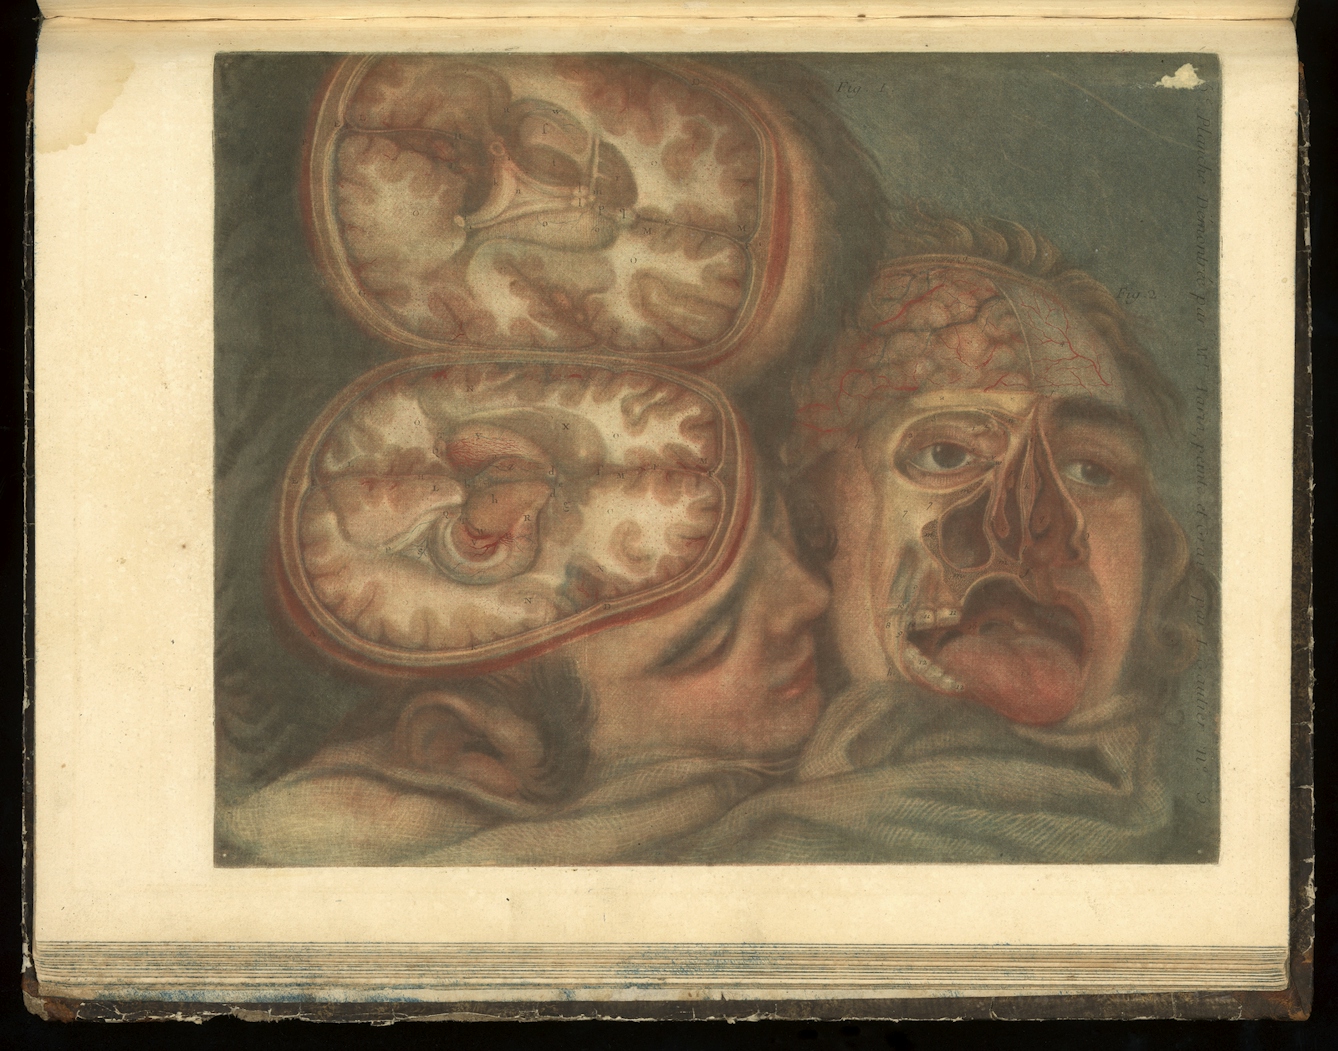 Colour engraving of two heads nuzzled together, on the left the head is depicted split open horizontally to display the brain and on the right layers have been cut away to show the inside of the face.